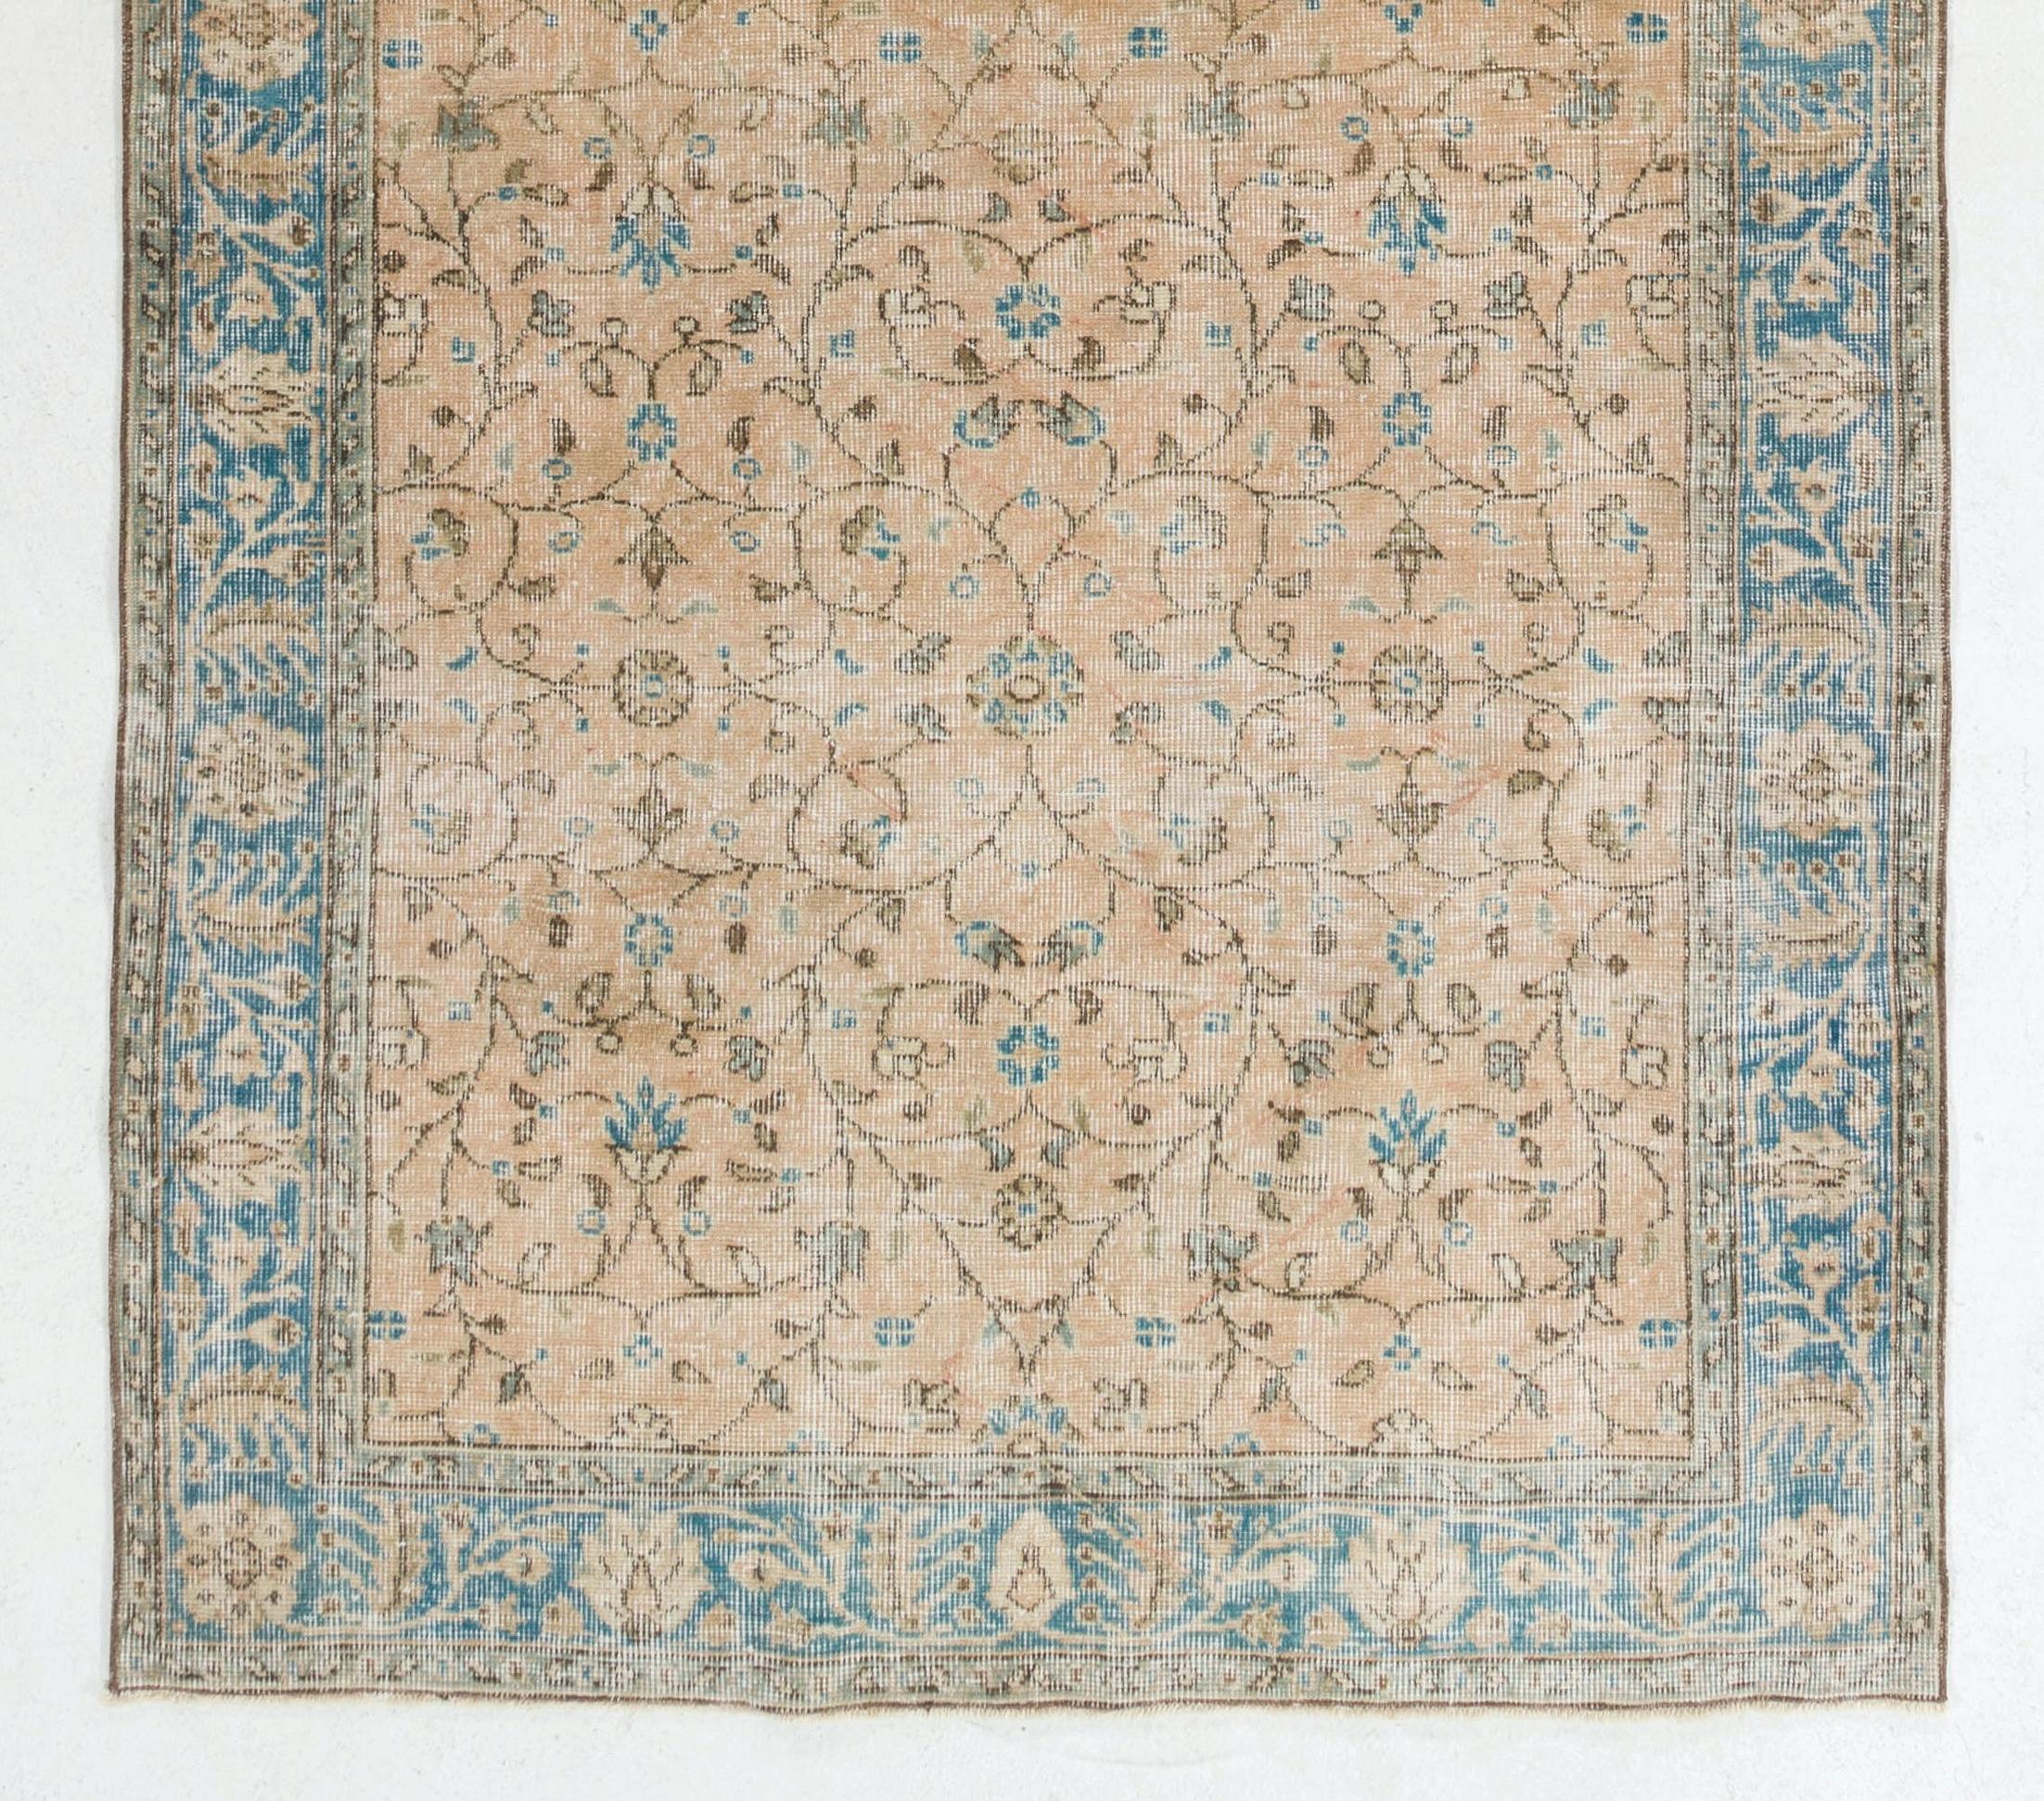 Hand-Knotted 4.7x12.8 Ft Vintage Handmade Turkish Floral Wool Runner Rug in Blue & Coral Pink